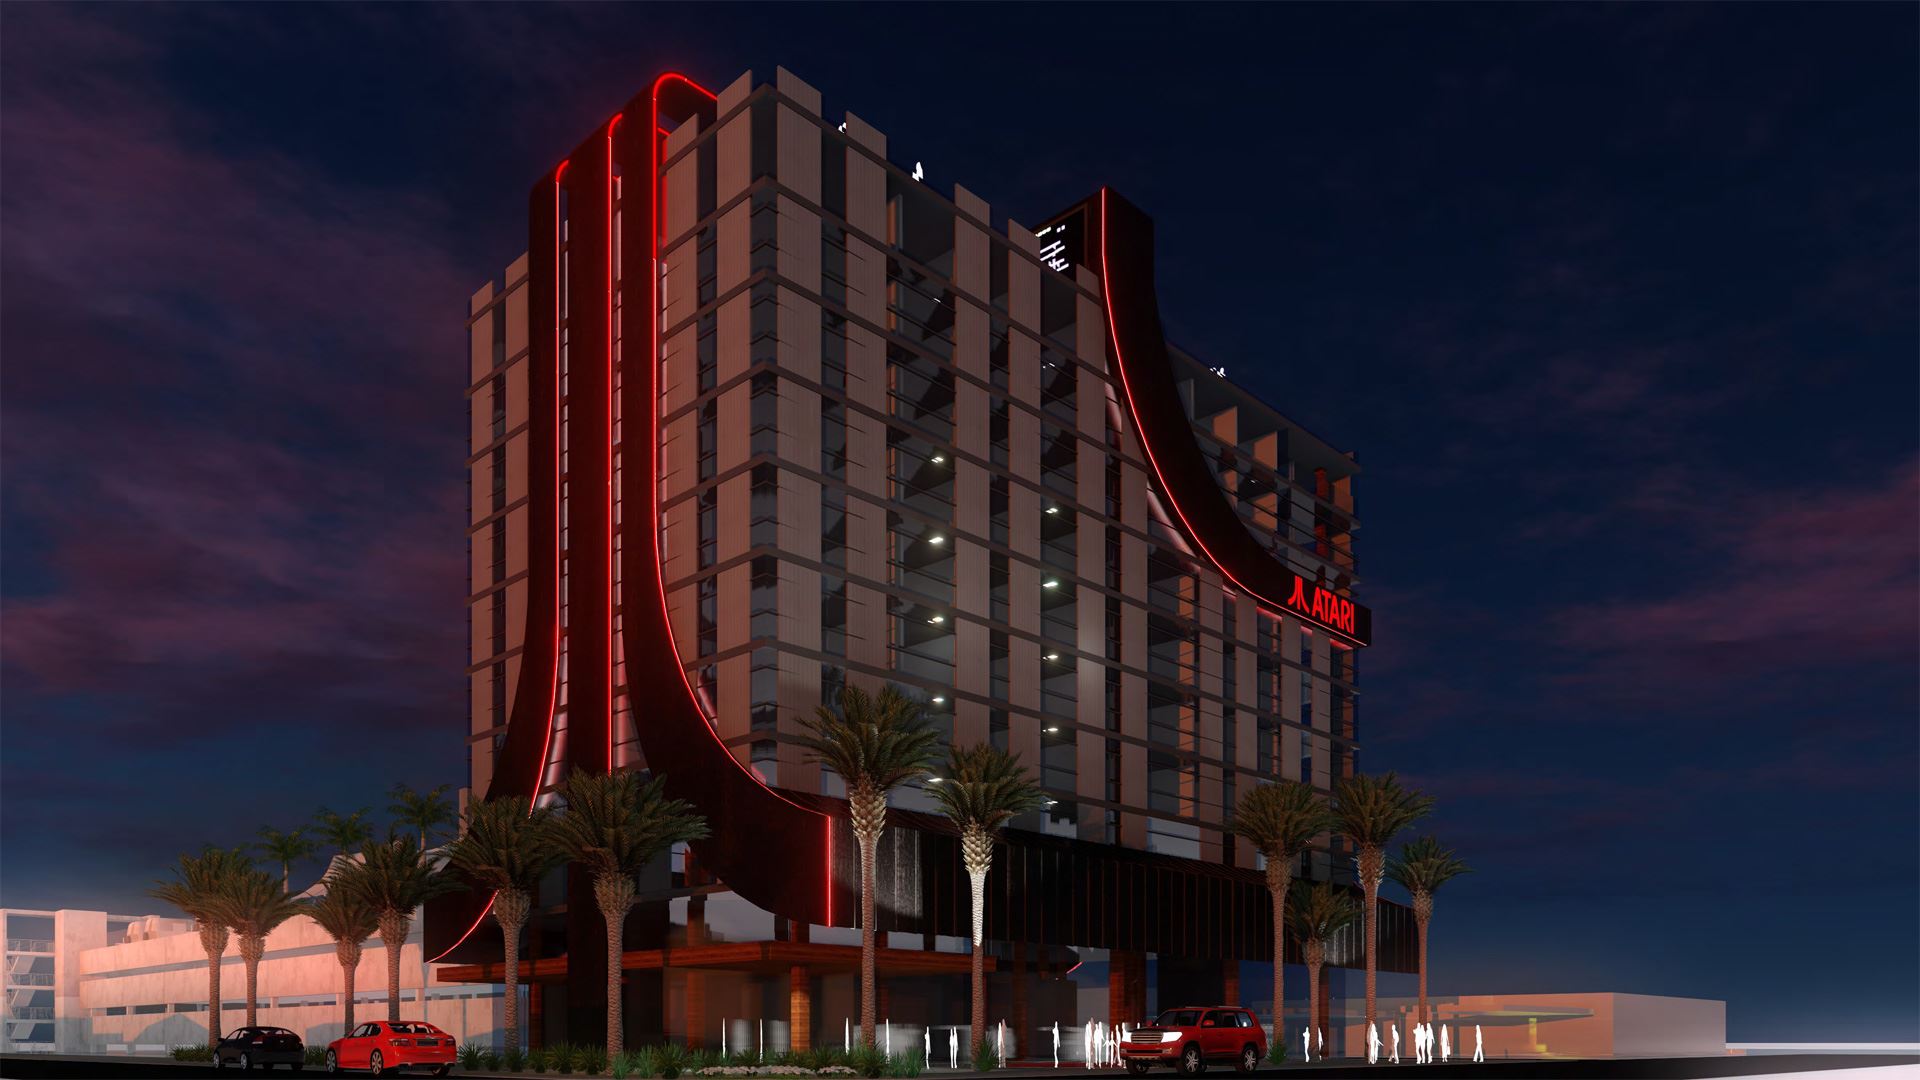 Atari to Launch First Video Game-Themed Hotel in Phoenix